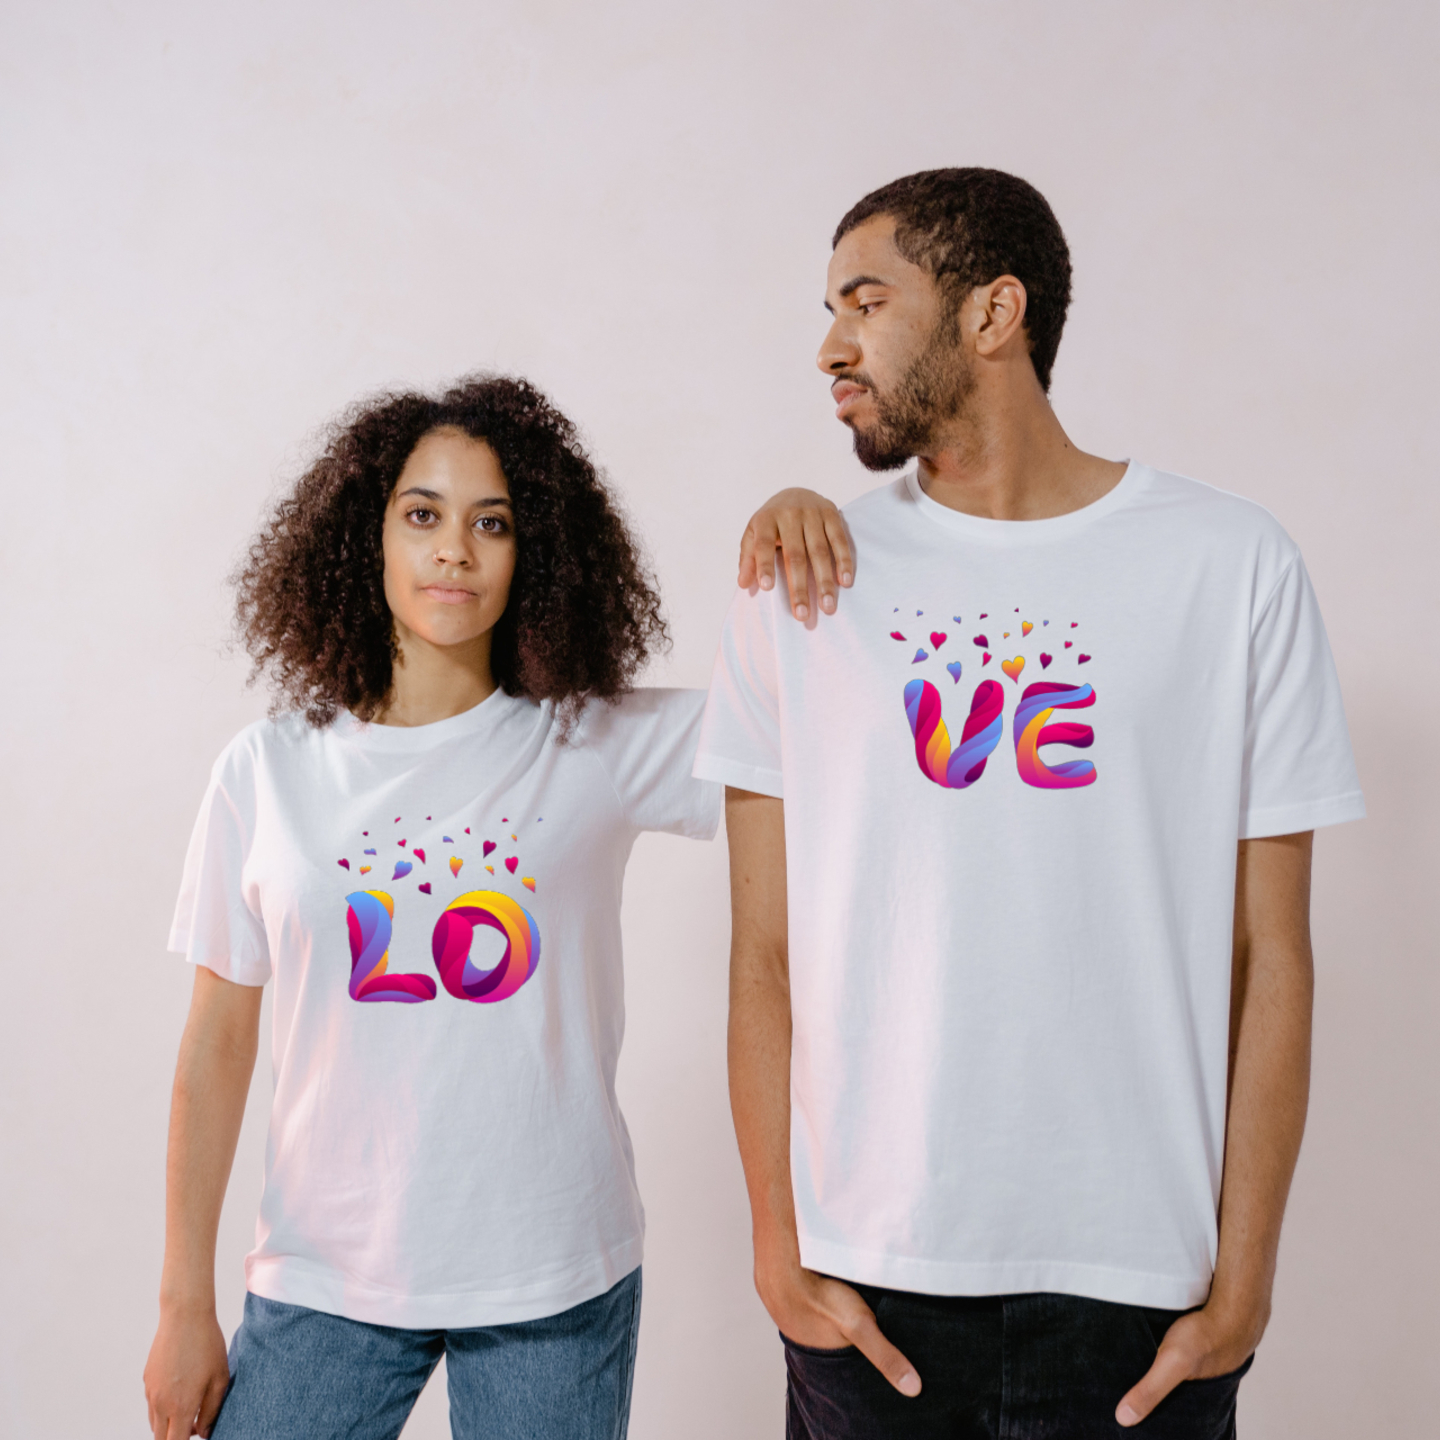 Love T-Shirt for couple